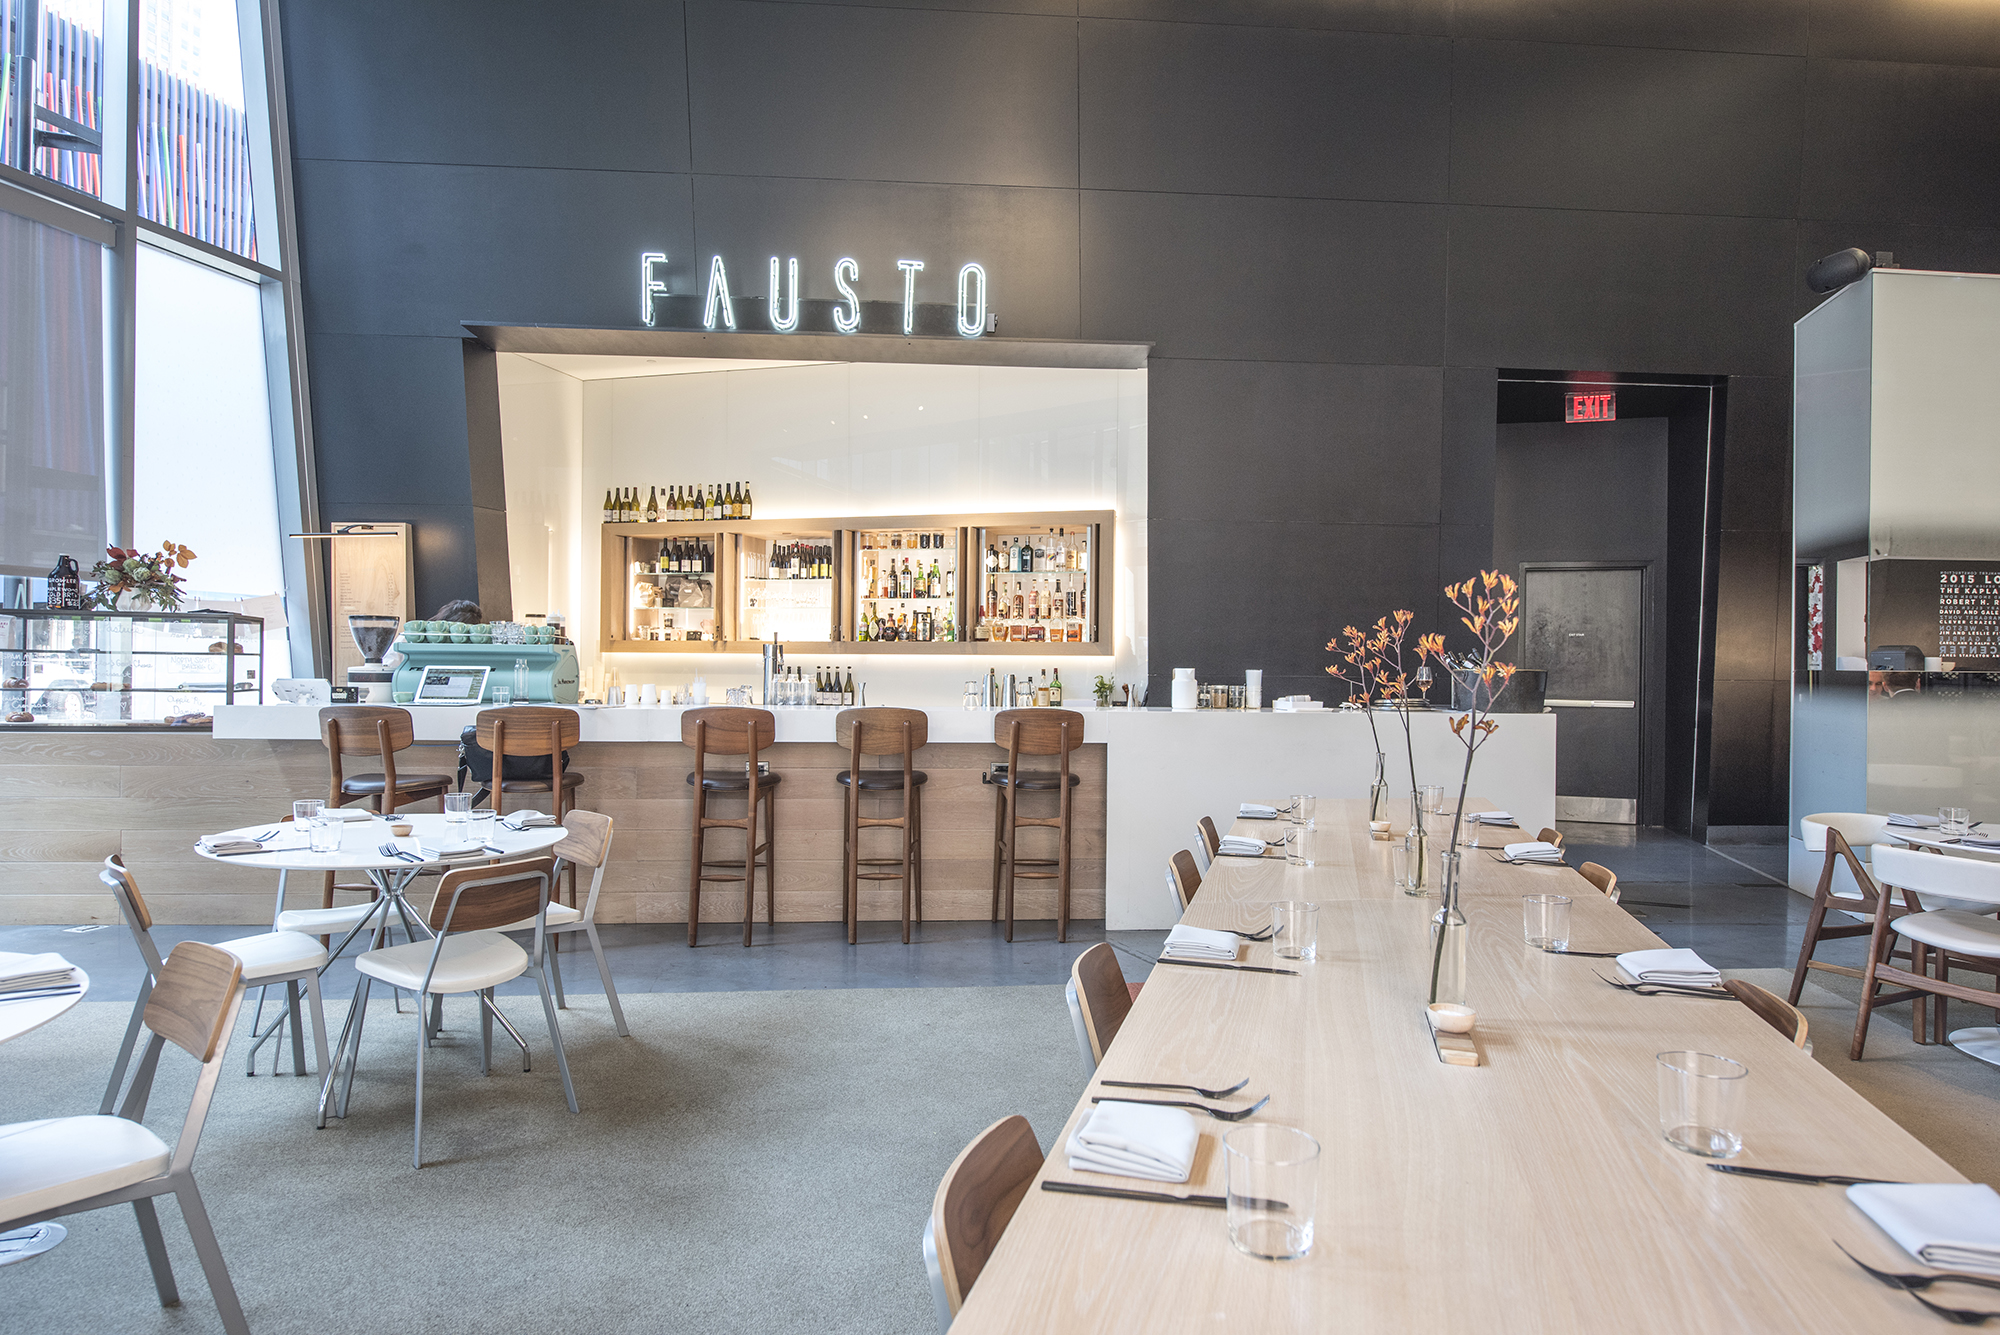  Dining area decorated for autumn at  Fausto at the CAC . || Image:  Twin Spire Photography  - Published: 10.2.2019 